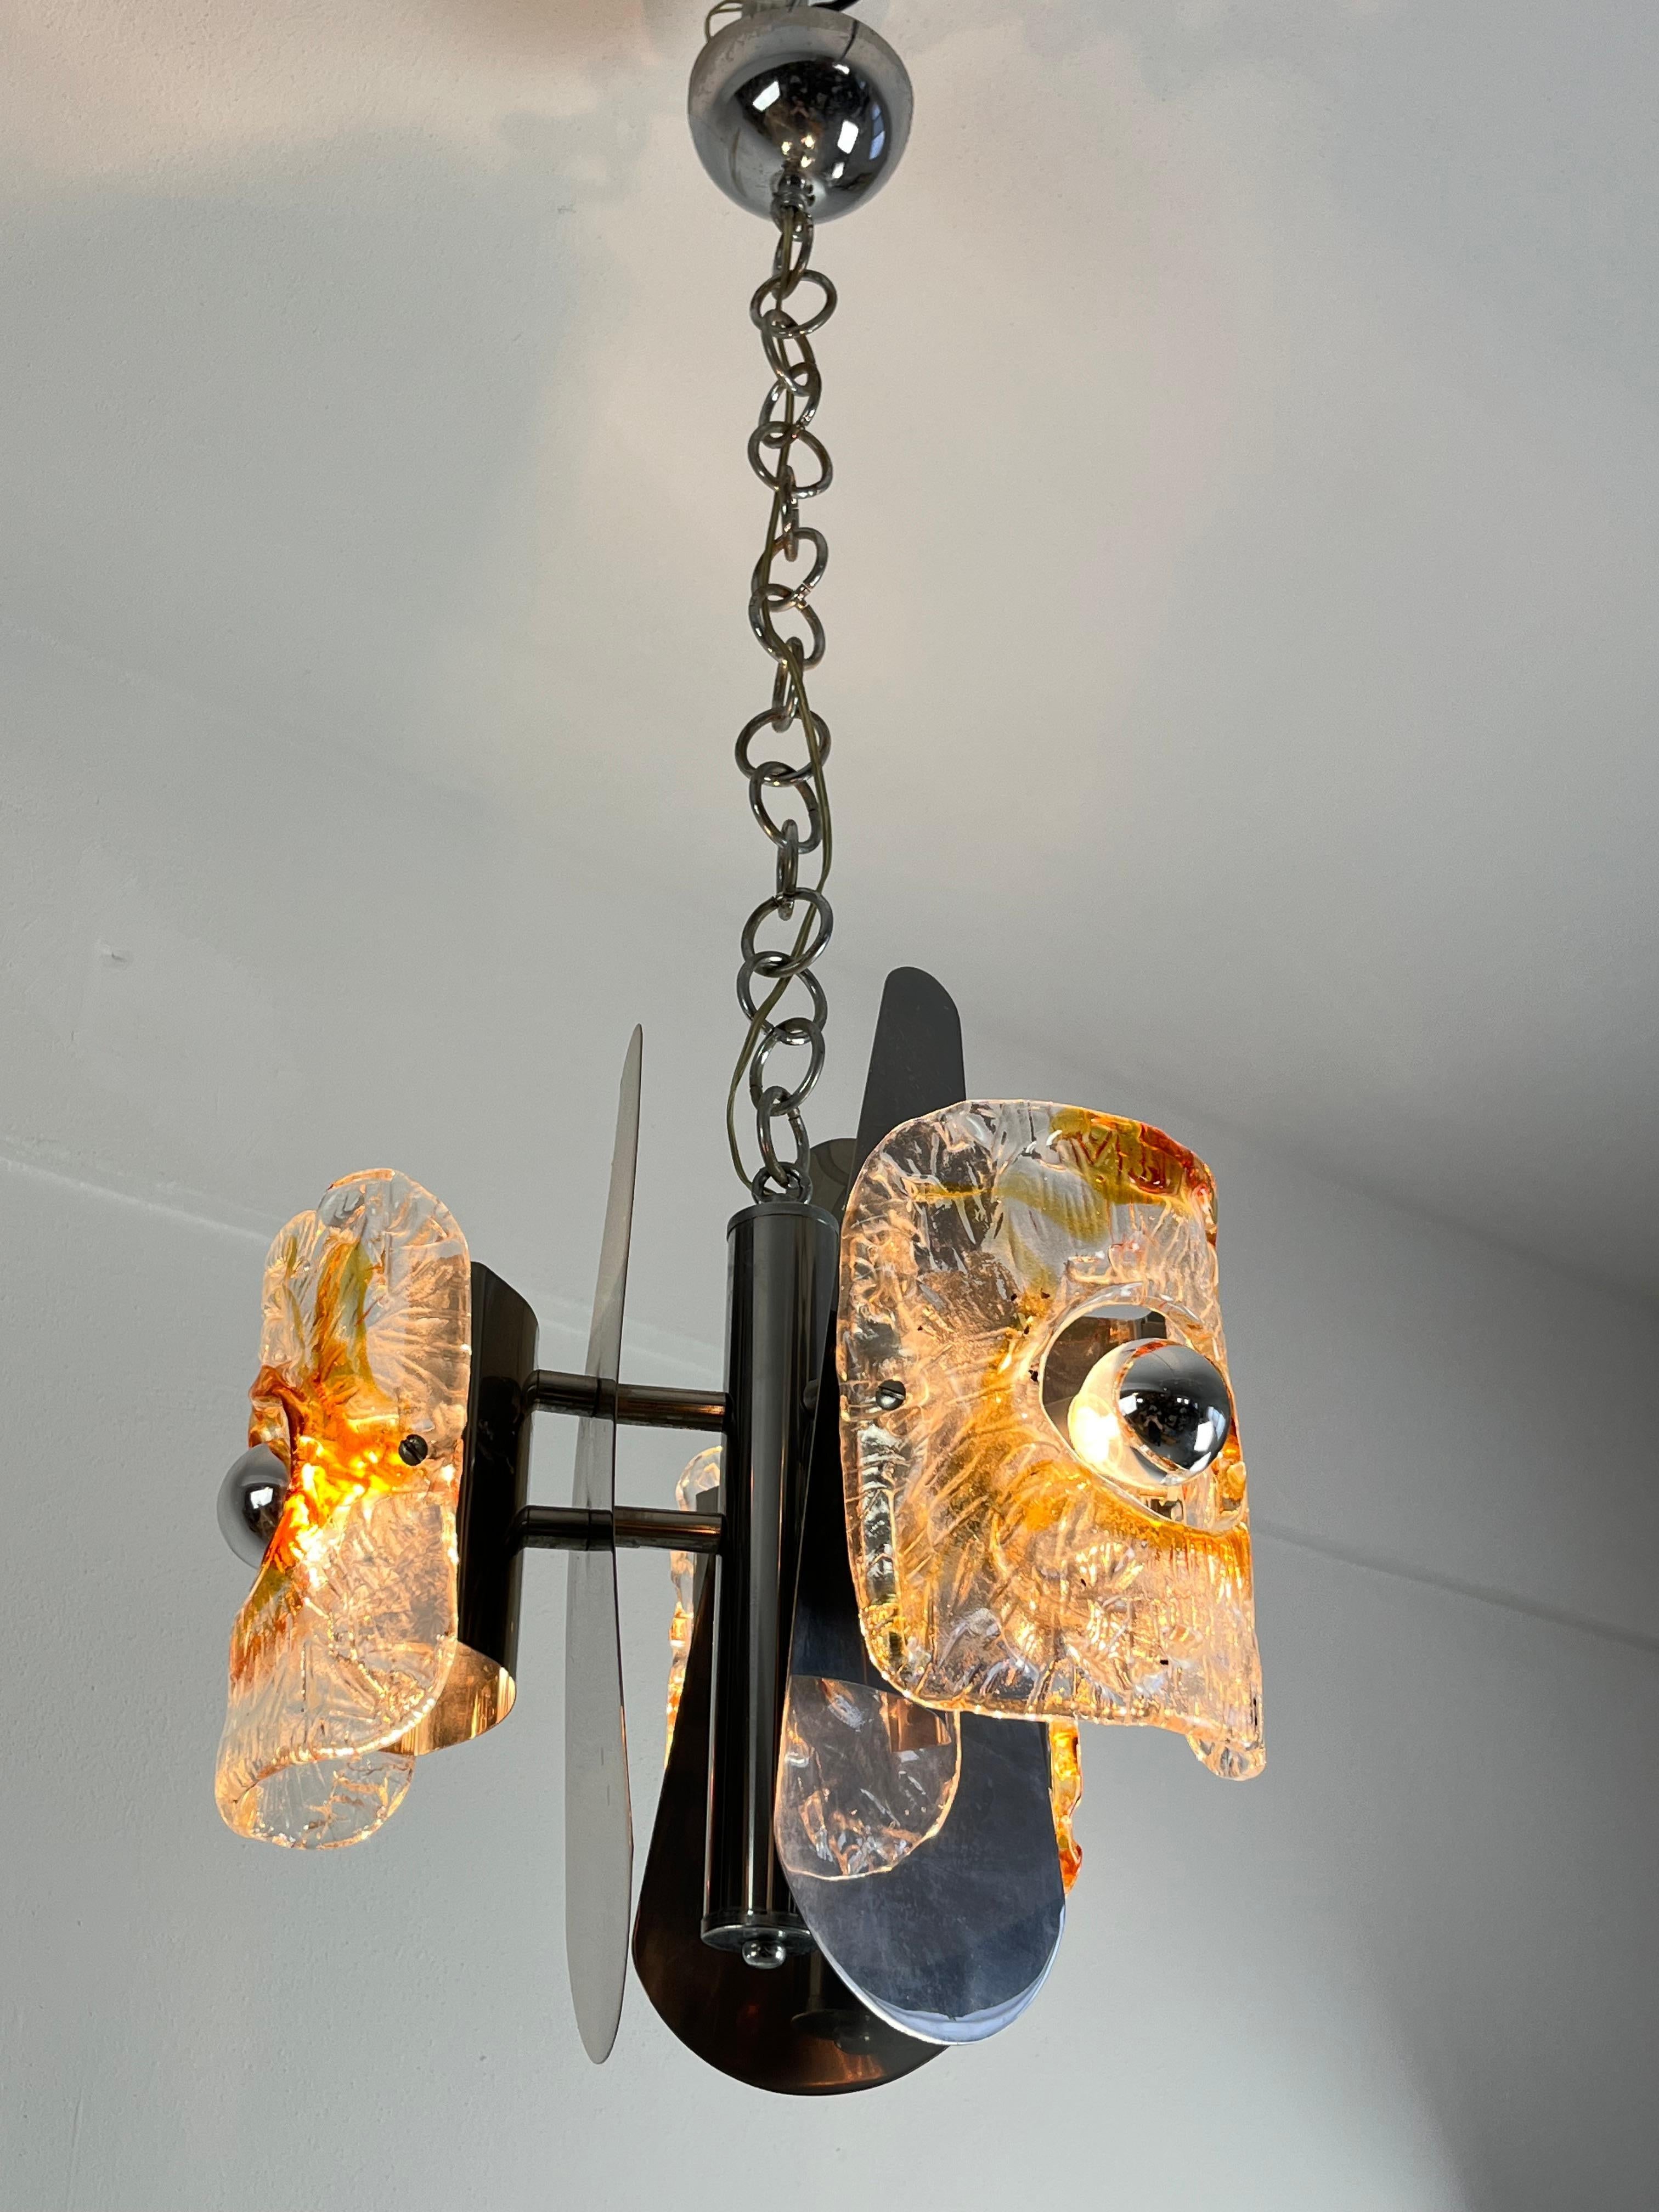 Mid-20th Century Mid-Century Chandelier In Murano Glass Attributed to Toni Zuccheri for Mazzega For Sale